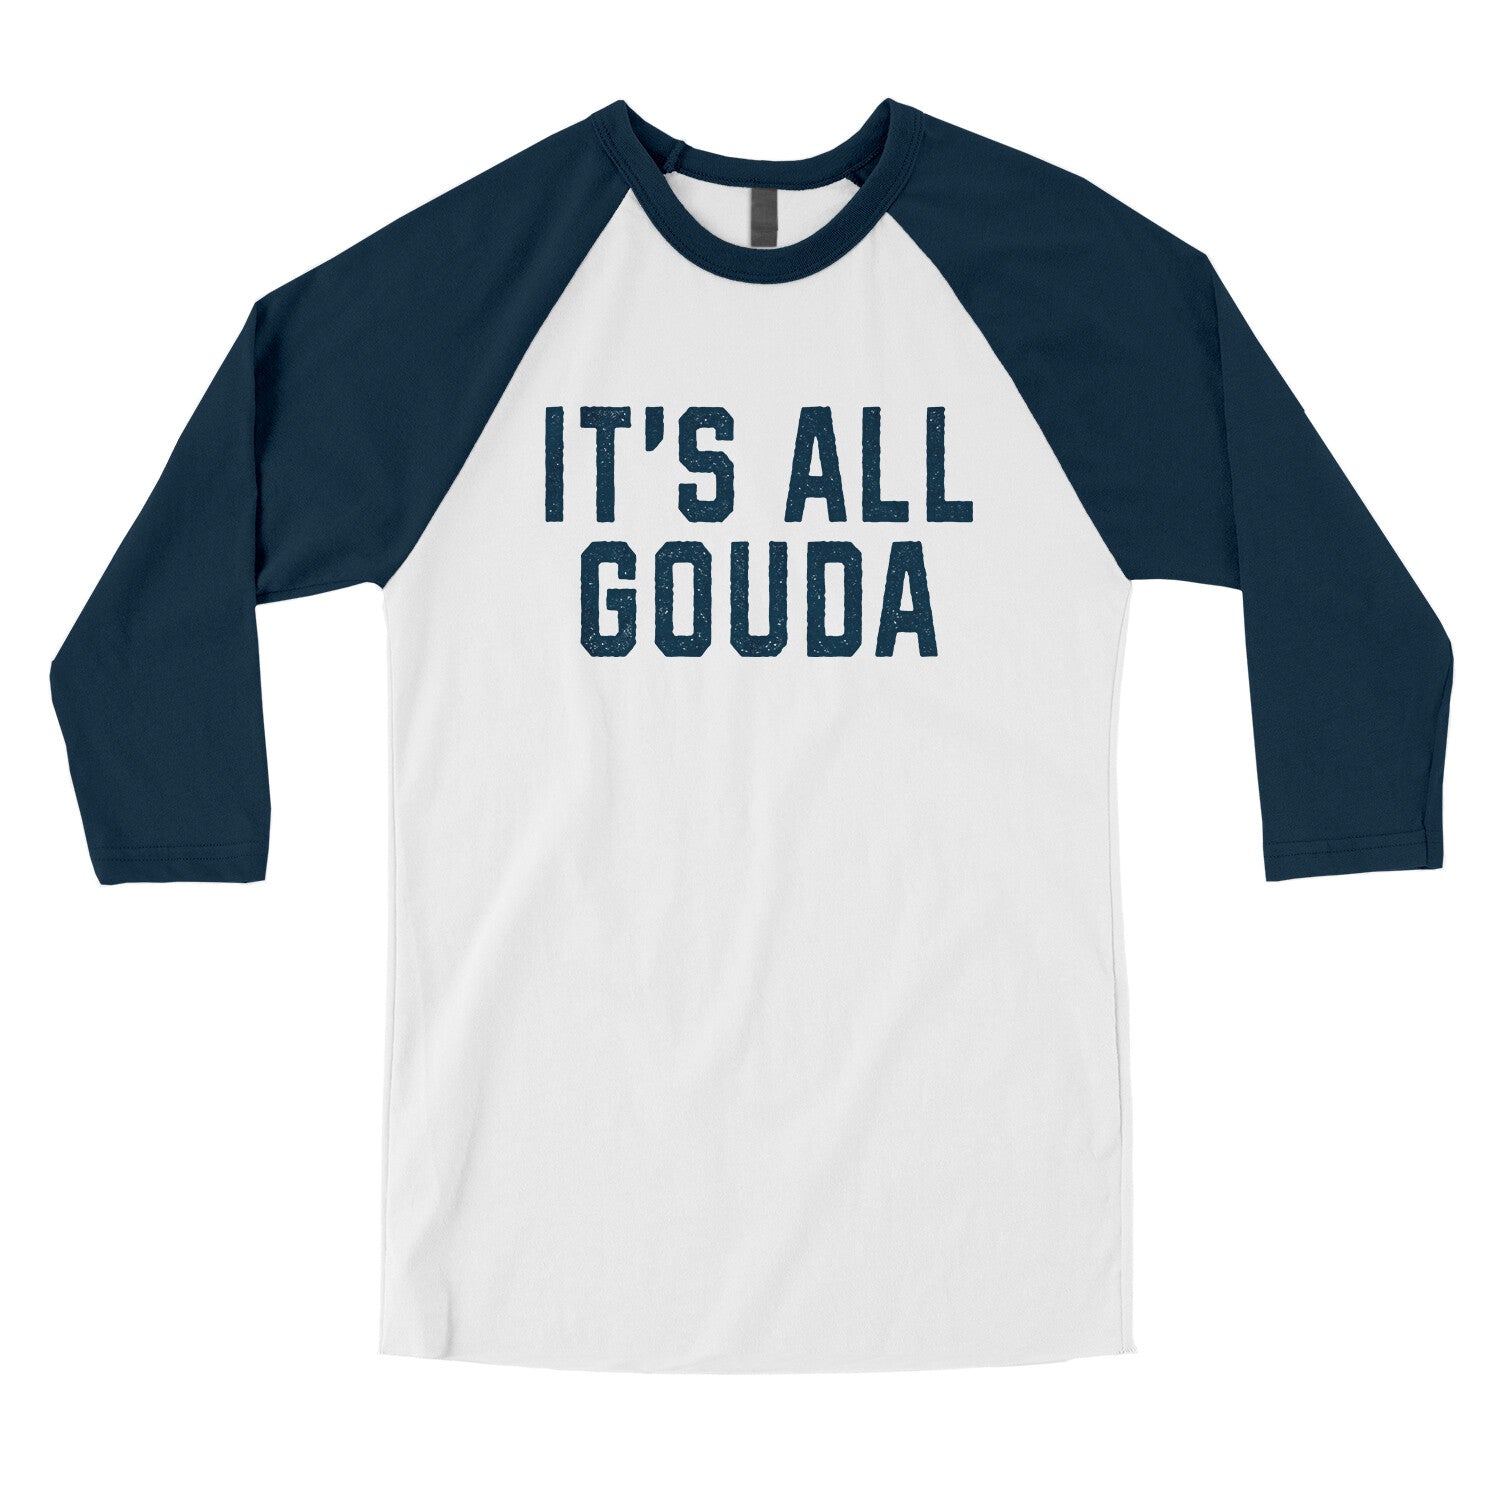 It’s All Gouda in White with Navy Color